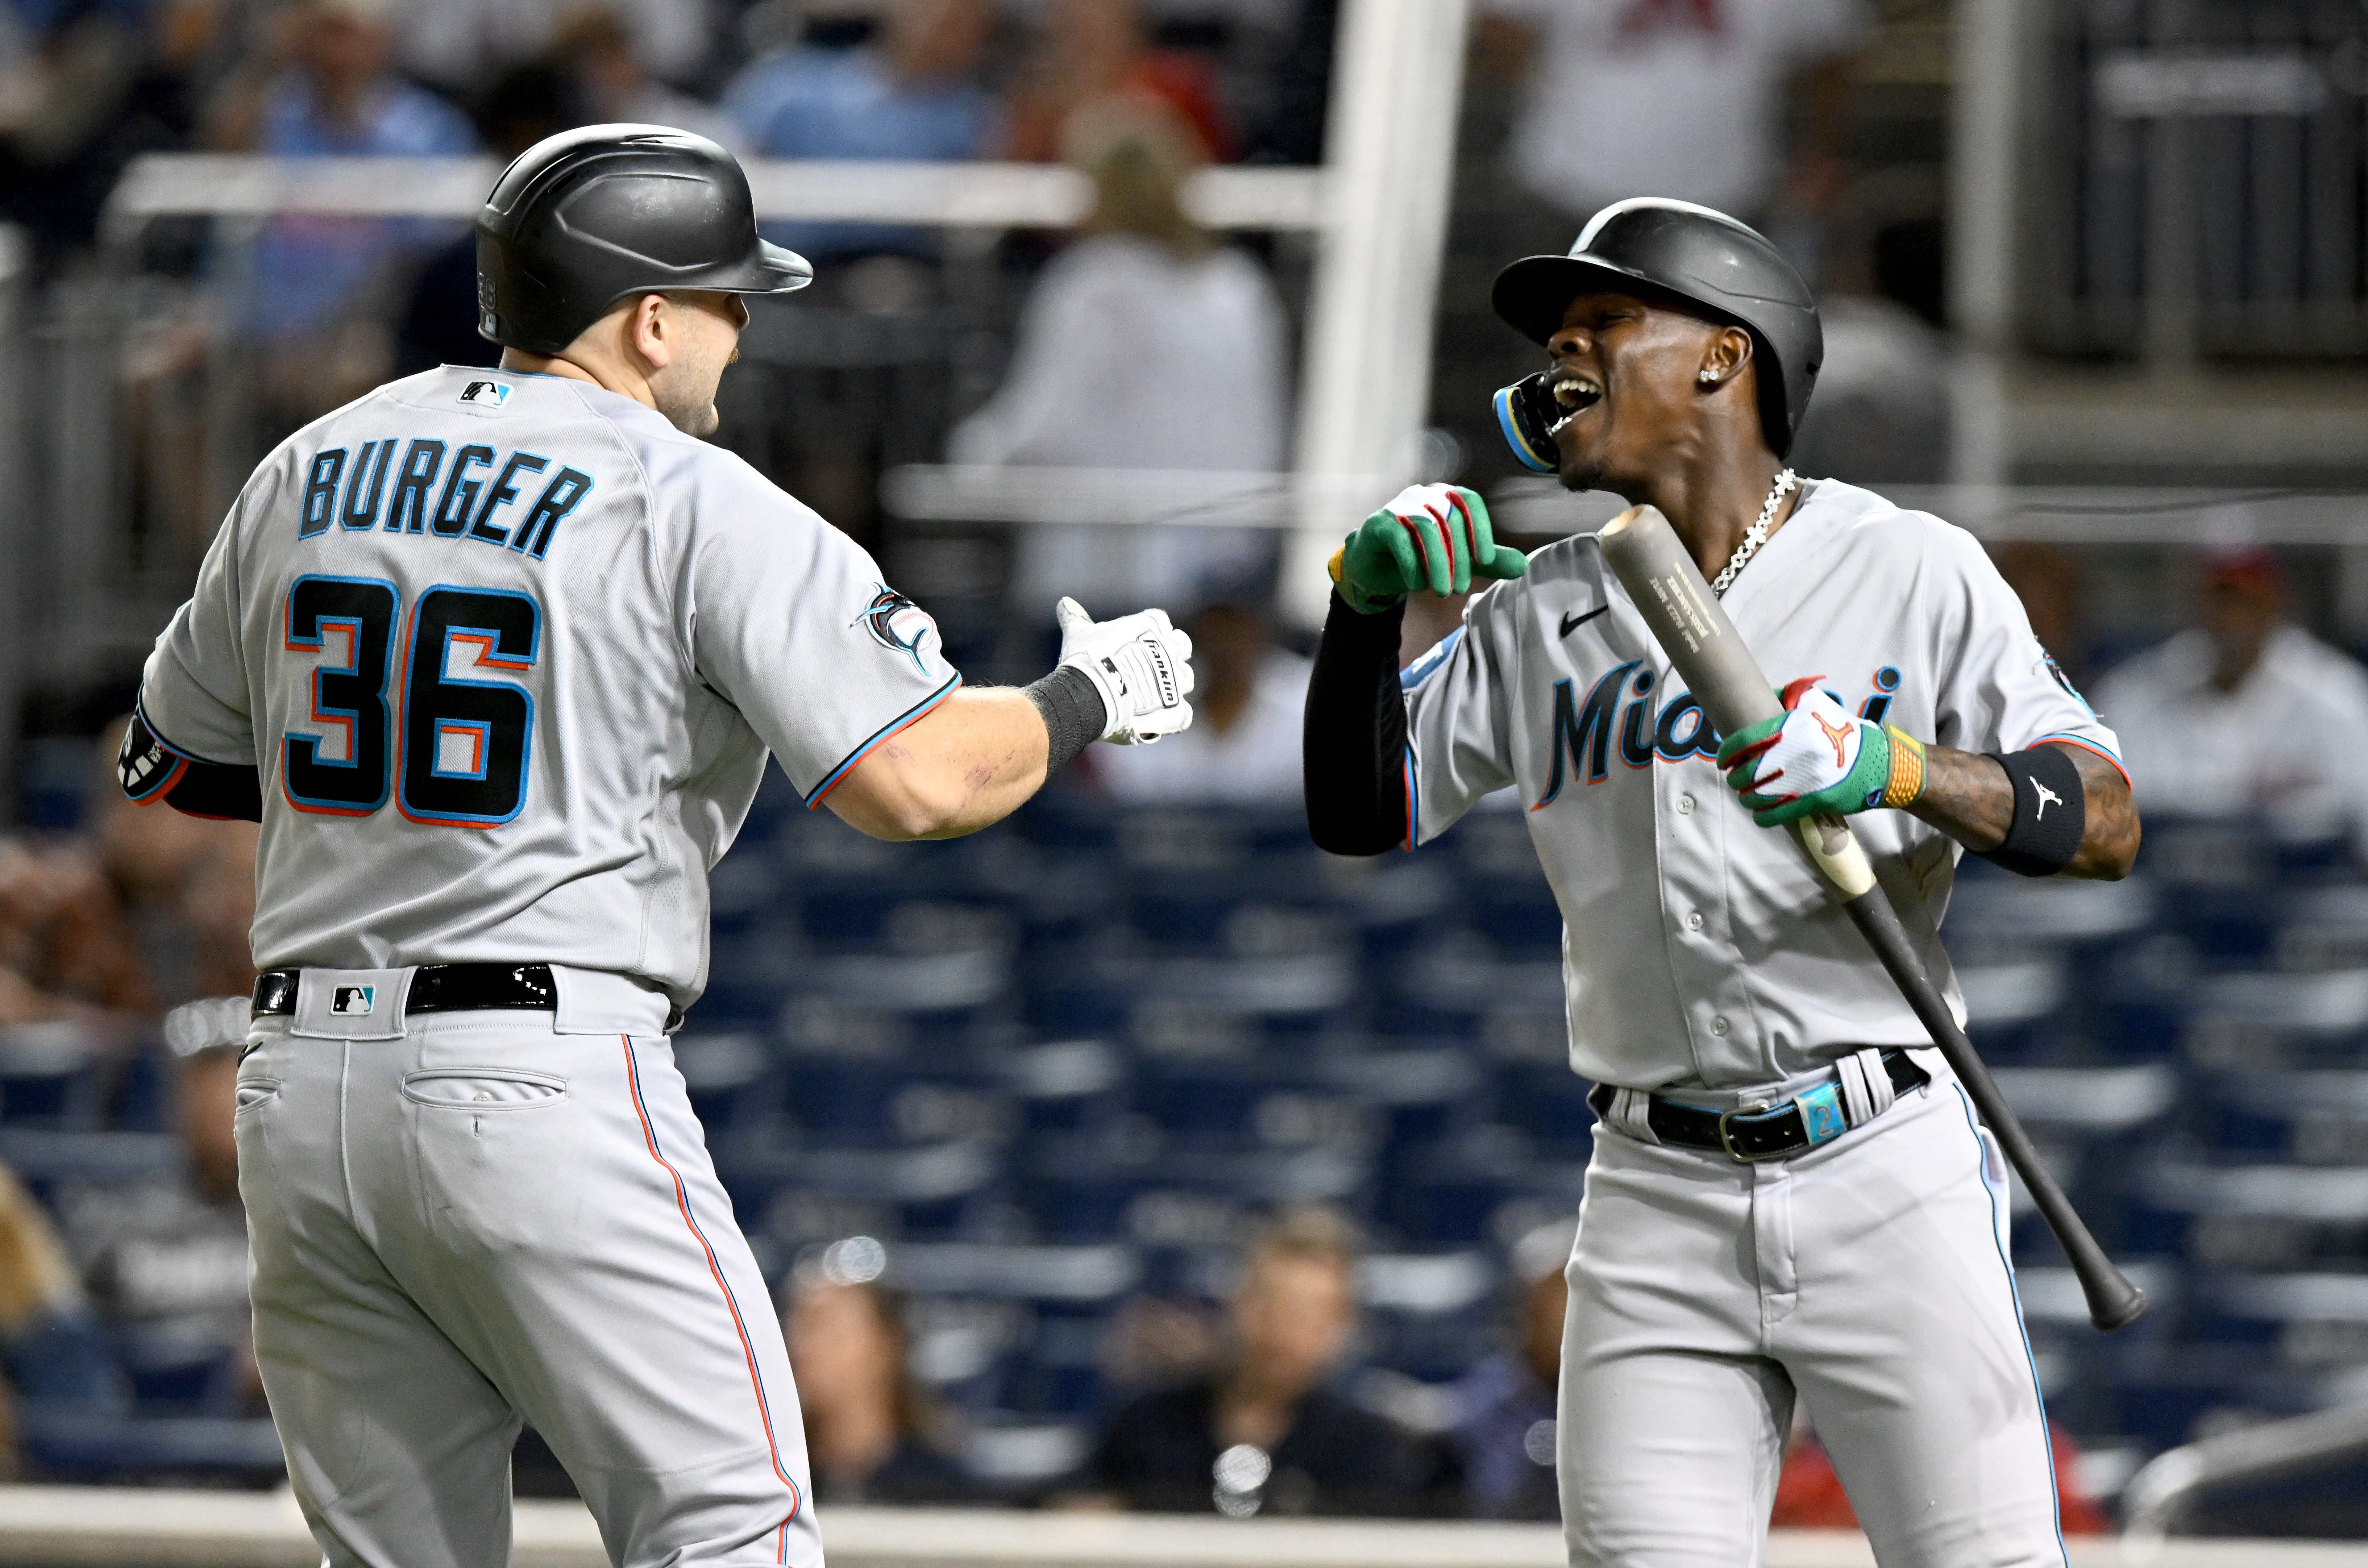 Chisholm's 3-run homer helps Marlins defeat Nationals 6-1 to get